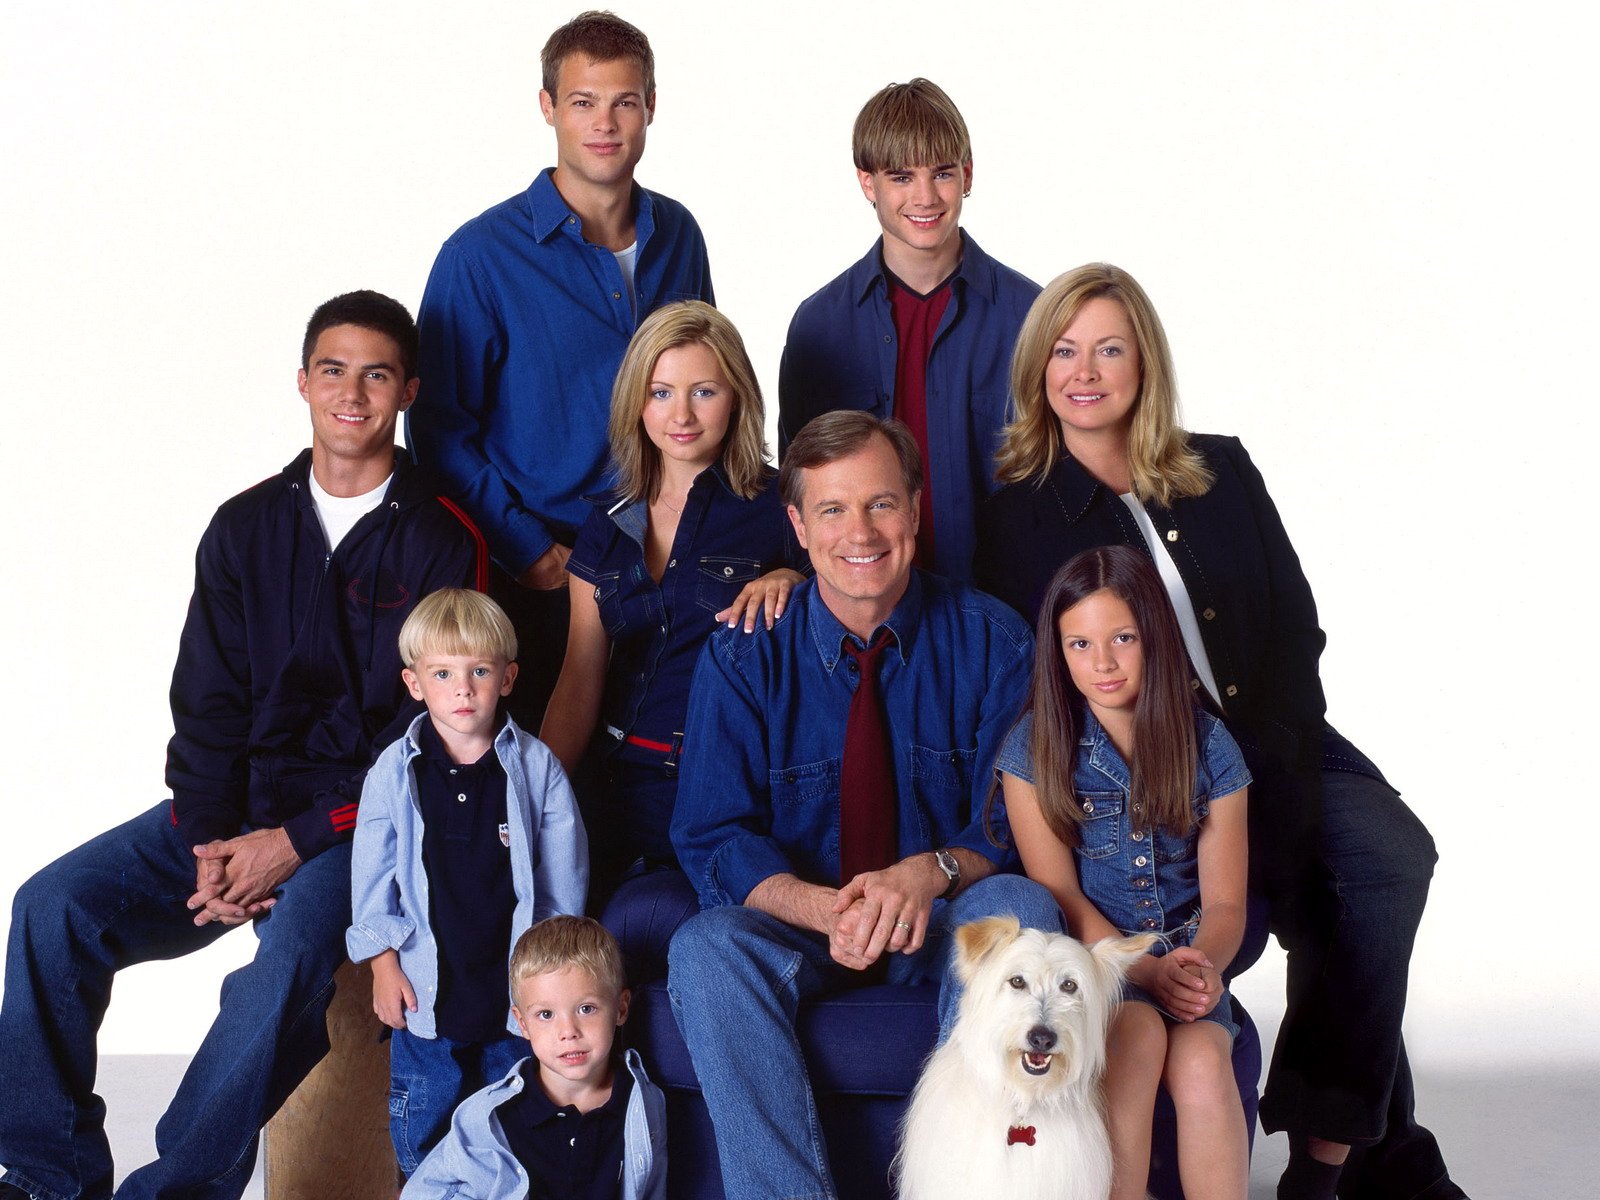 7th Heaven Image HD Wallpaper And Background Photos